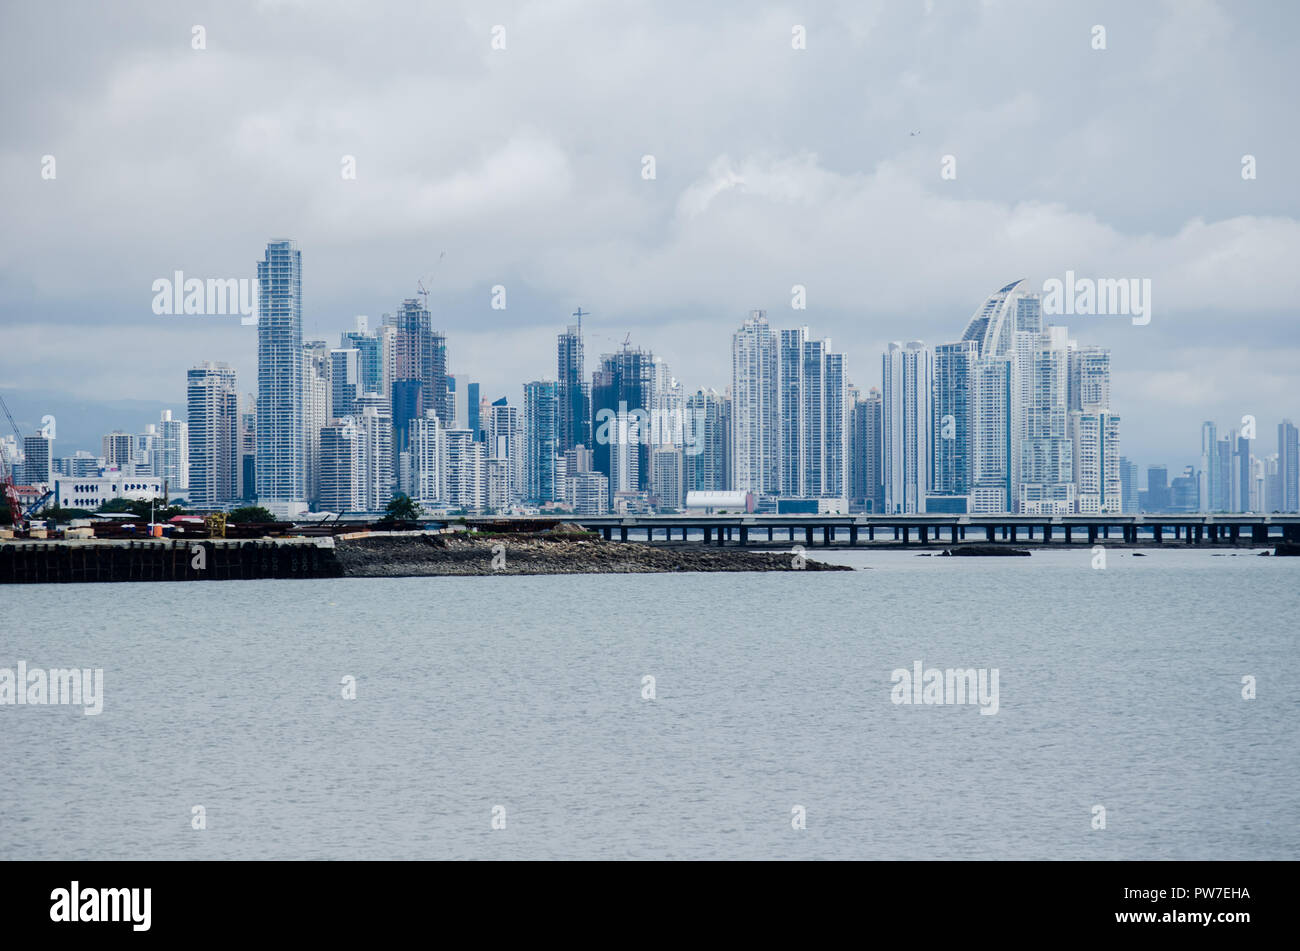 Panama City skyline as seen from the Causeway in Amador, Panama 2018 Stock Photo